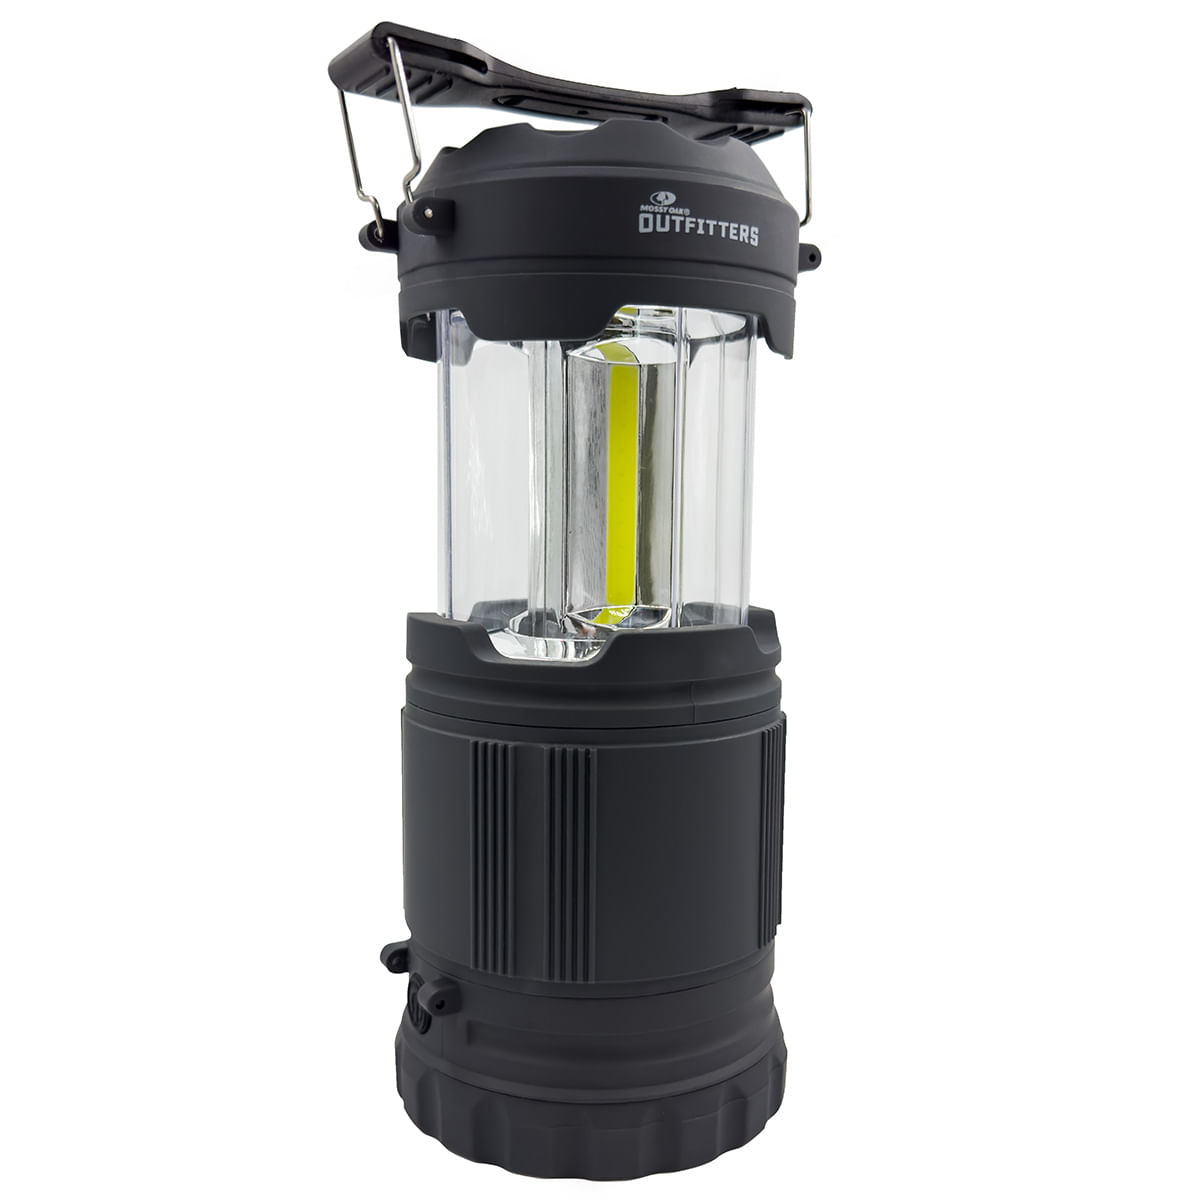 Sprout Lantern by UCO - mini camp light - compact dimmable blue